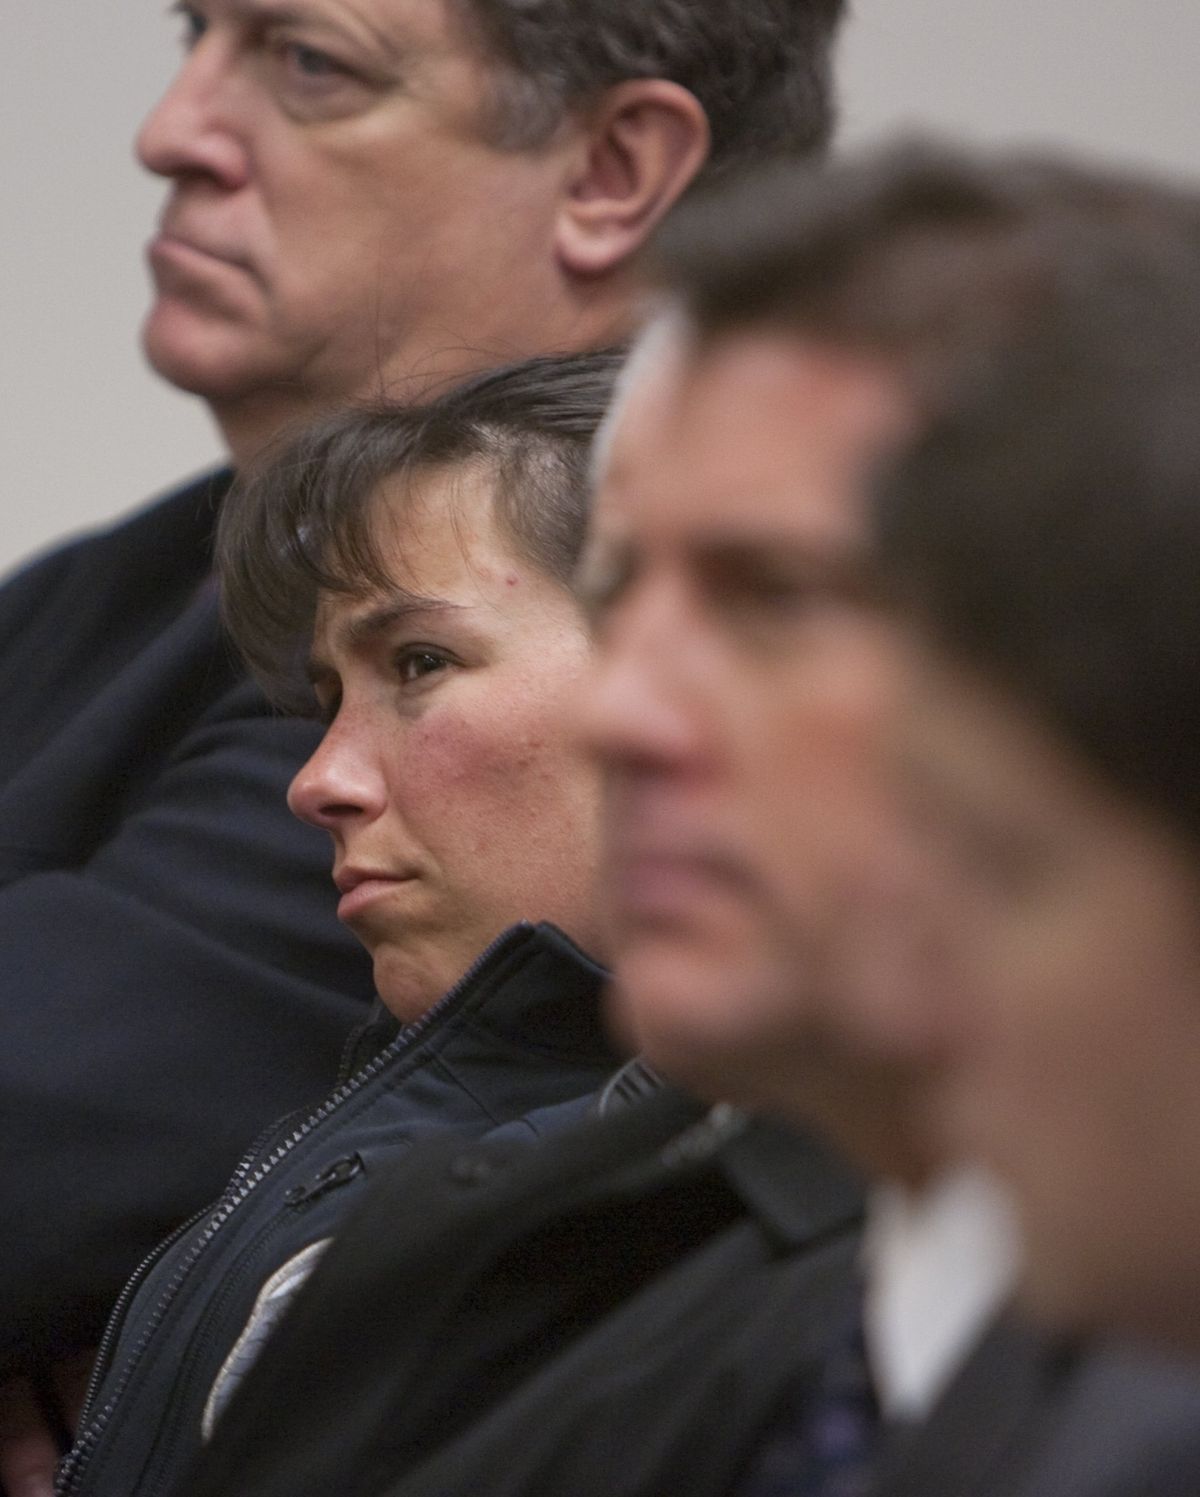 Seattle police Officer Britt Sweeney looks on during jury selection  Monday. Sweeney was injured and her partner, Seattle Officer Timothy Brenton, was killed in a shooting on Oct. 31.